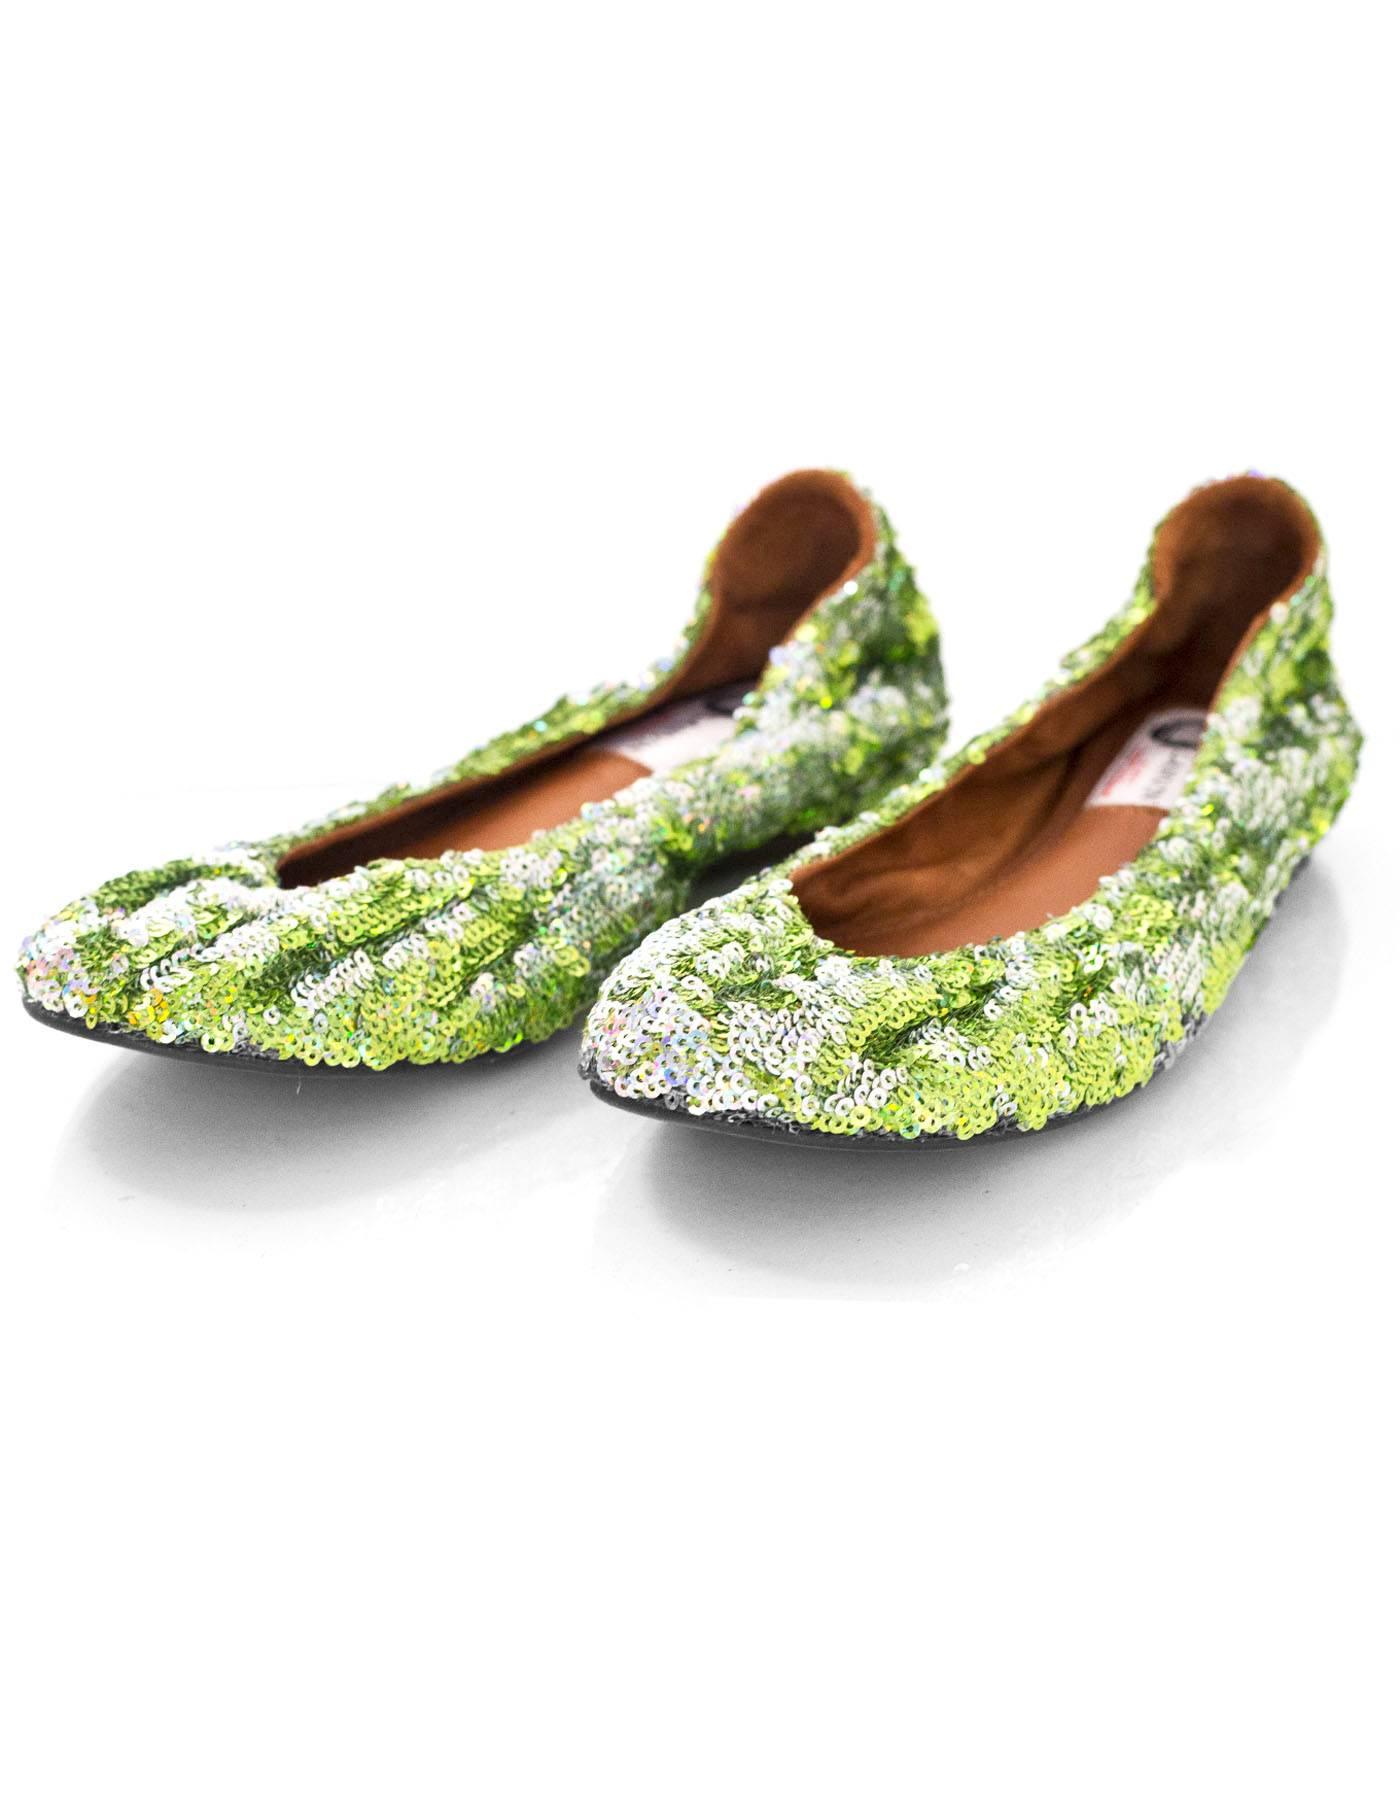 Lanvin Green Sequin Flats Sz 38.5 NEW

Made In: Portugal
Color: Green
Materials: Sequin
Closure/Opening: Slide on
Sole Stamp: Lanvin Paris 38.5
Overall Condition: Excellent pre-owned condition, NEW
Included: Lanvin dust bag
Marked Size: 38.5
Heel